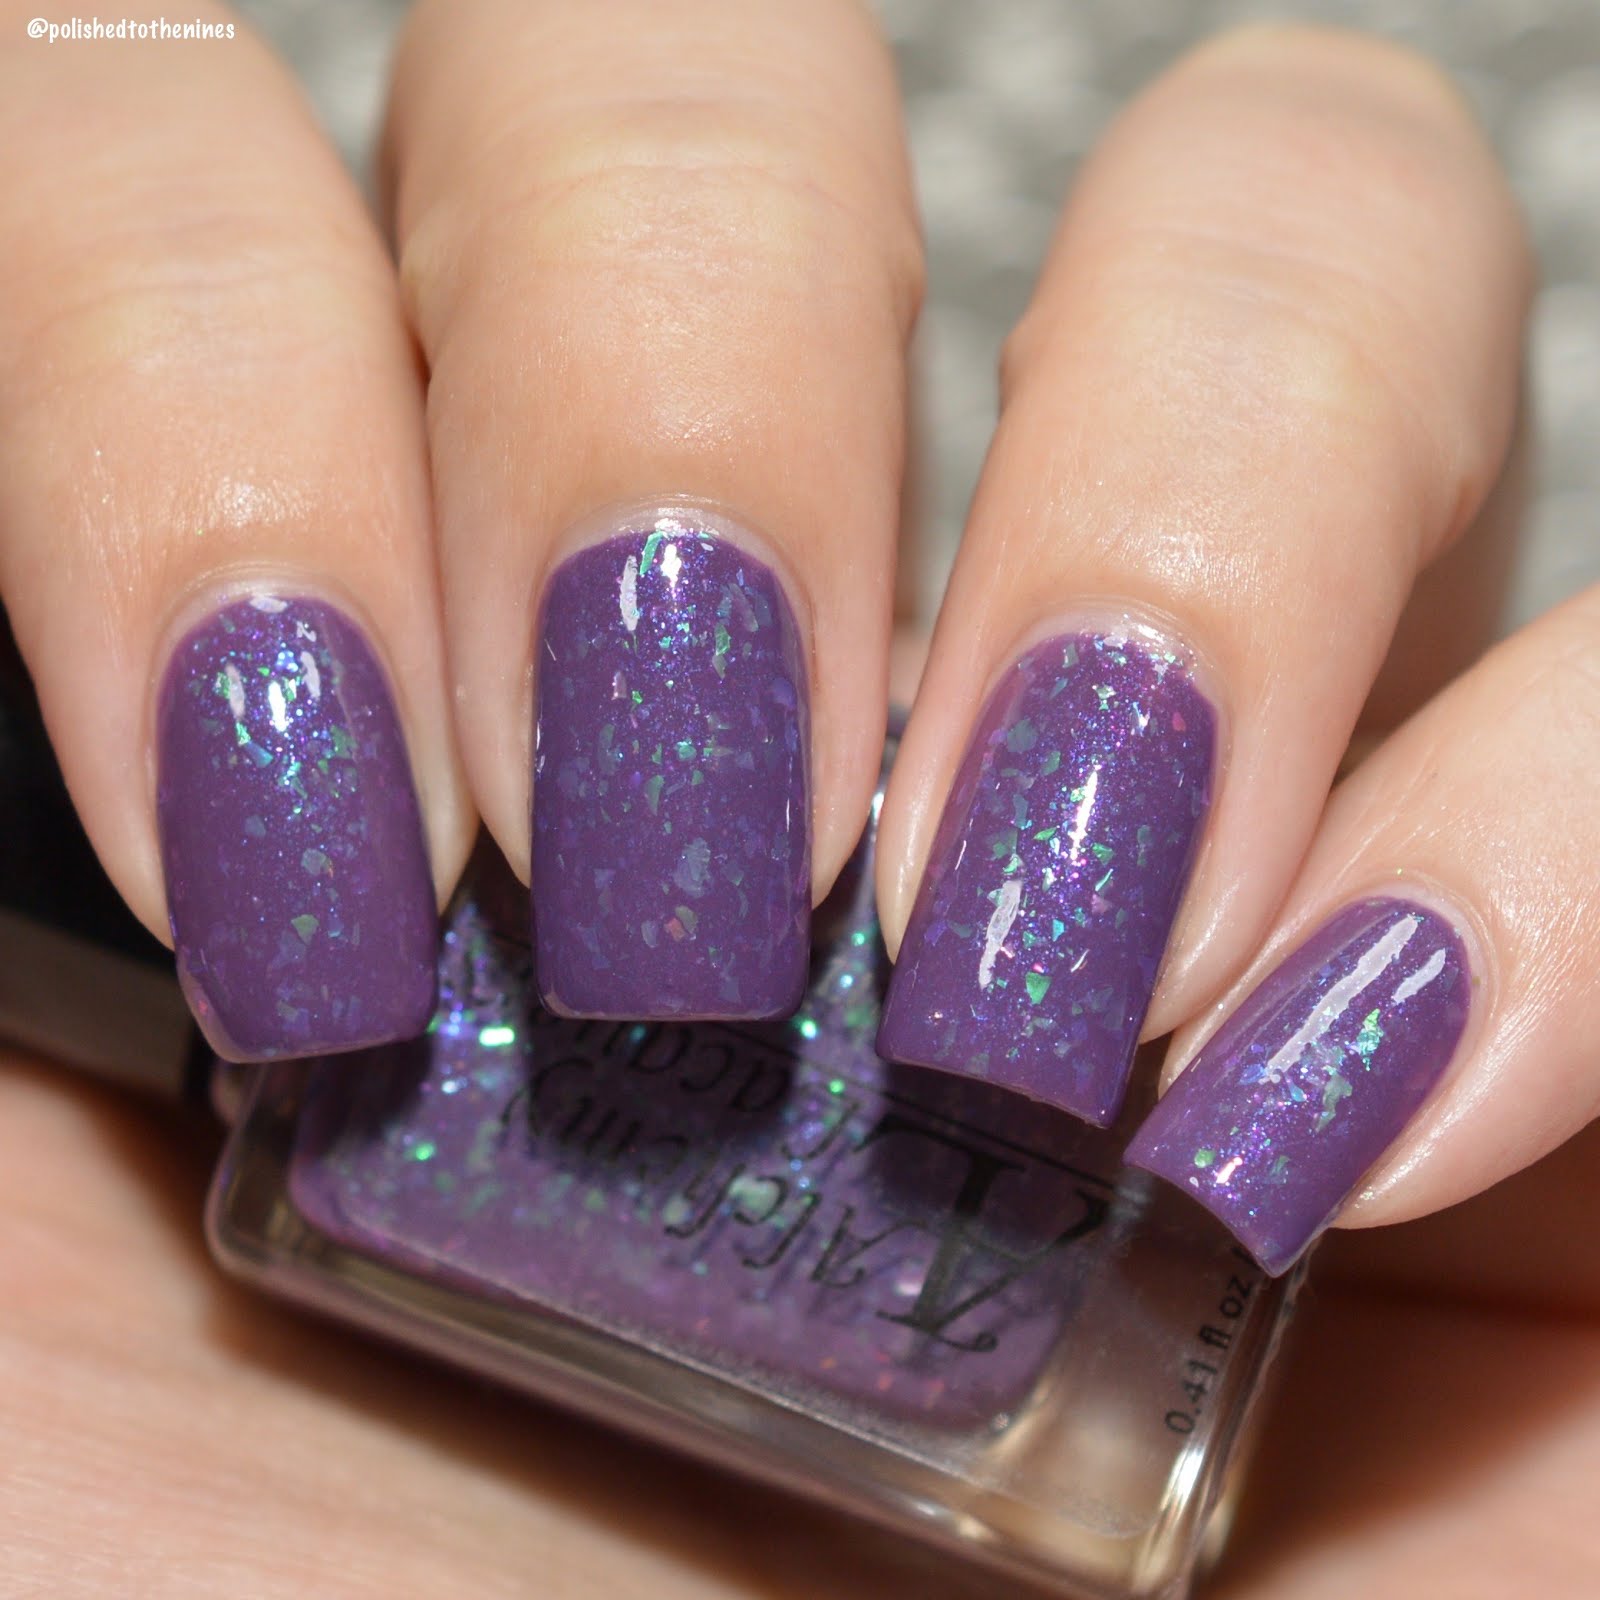 Polished to the Nines: Alchemy Lacquers - Star Shards & a Limited Edition!